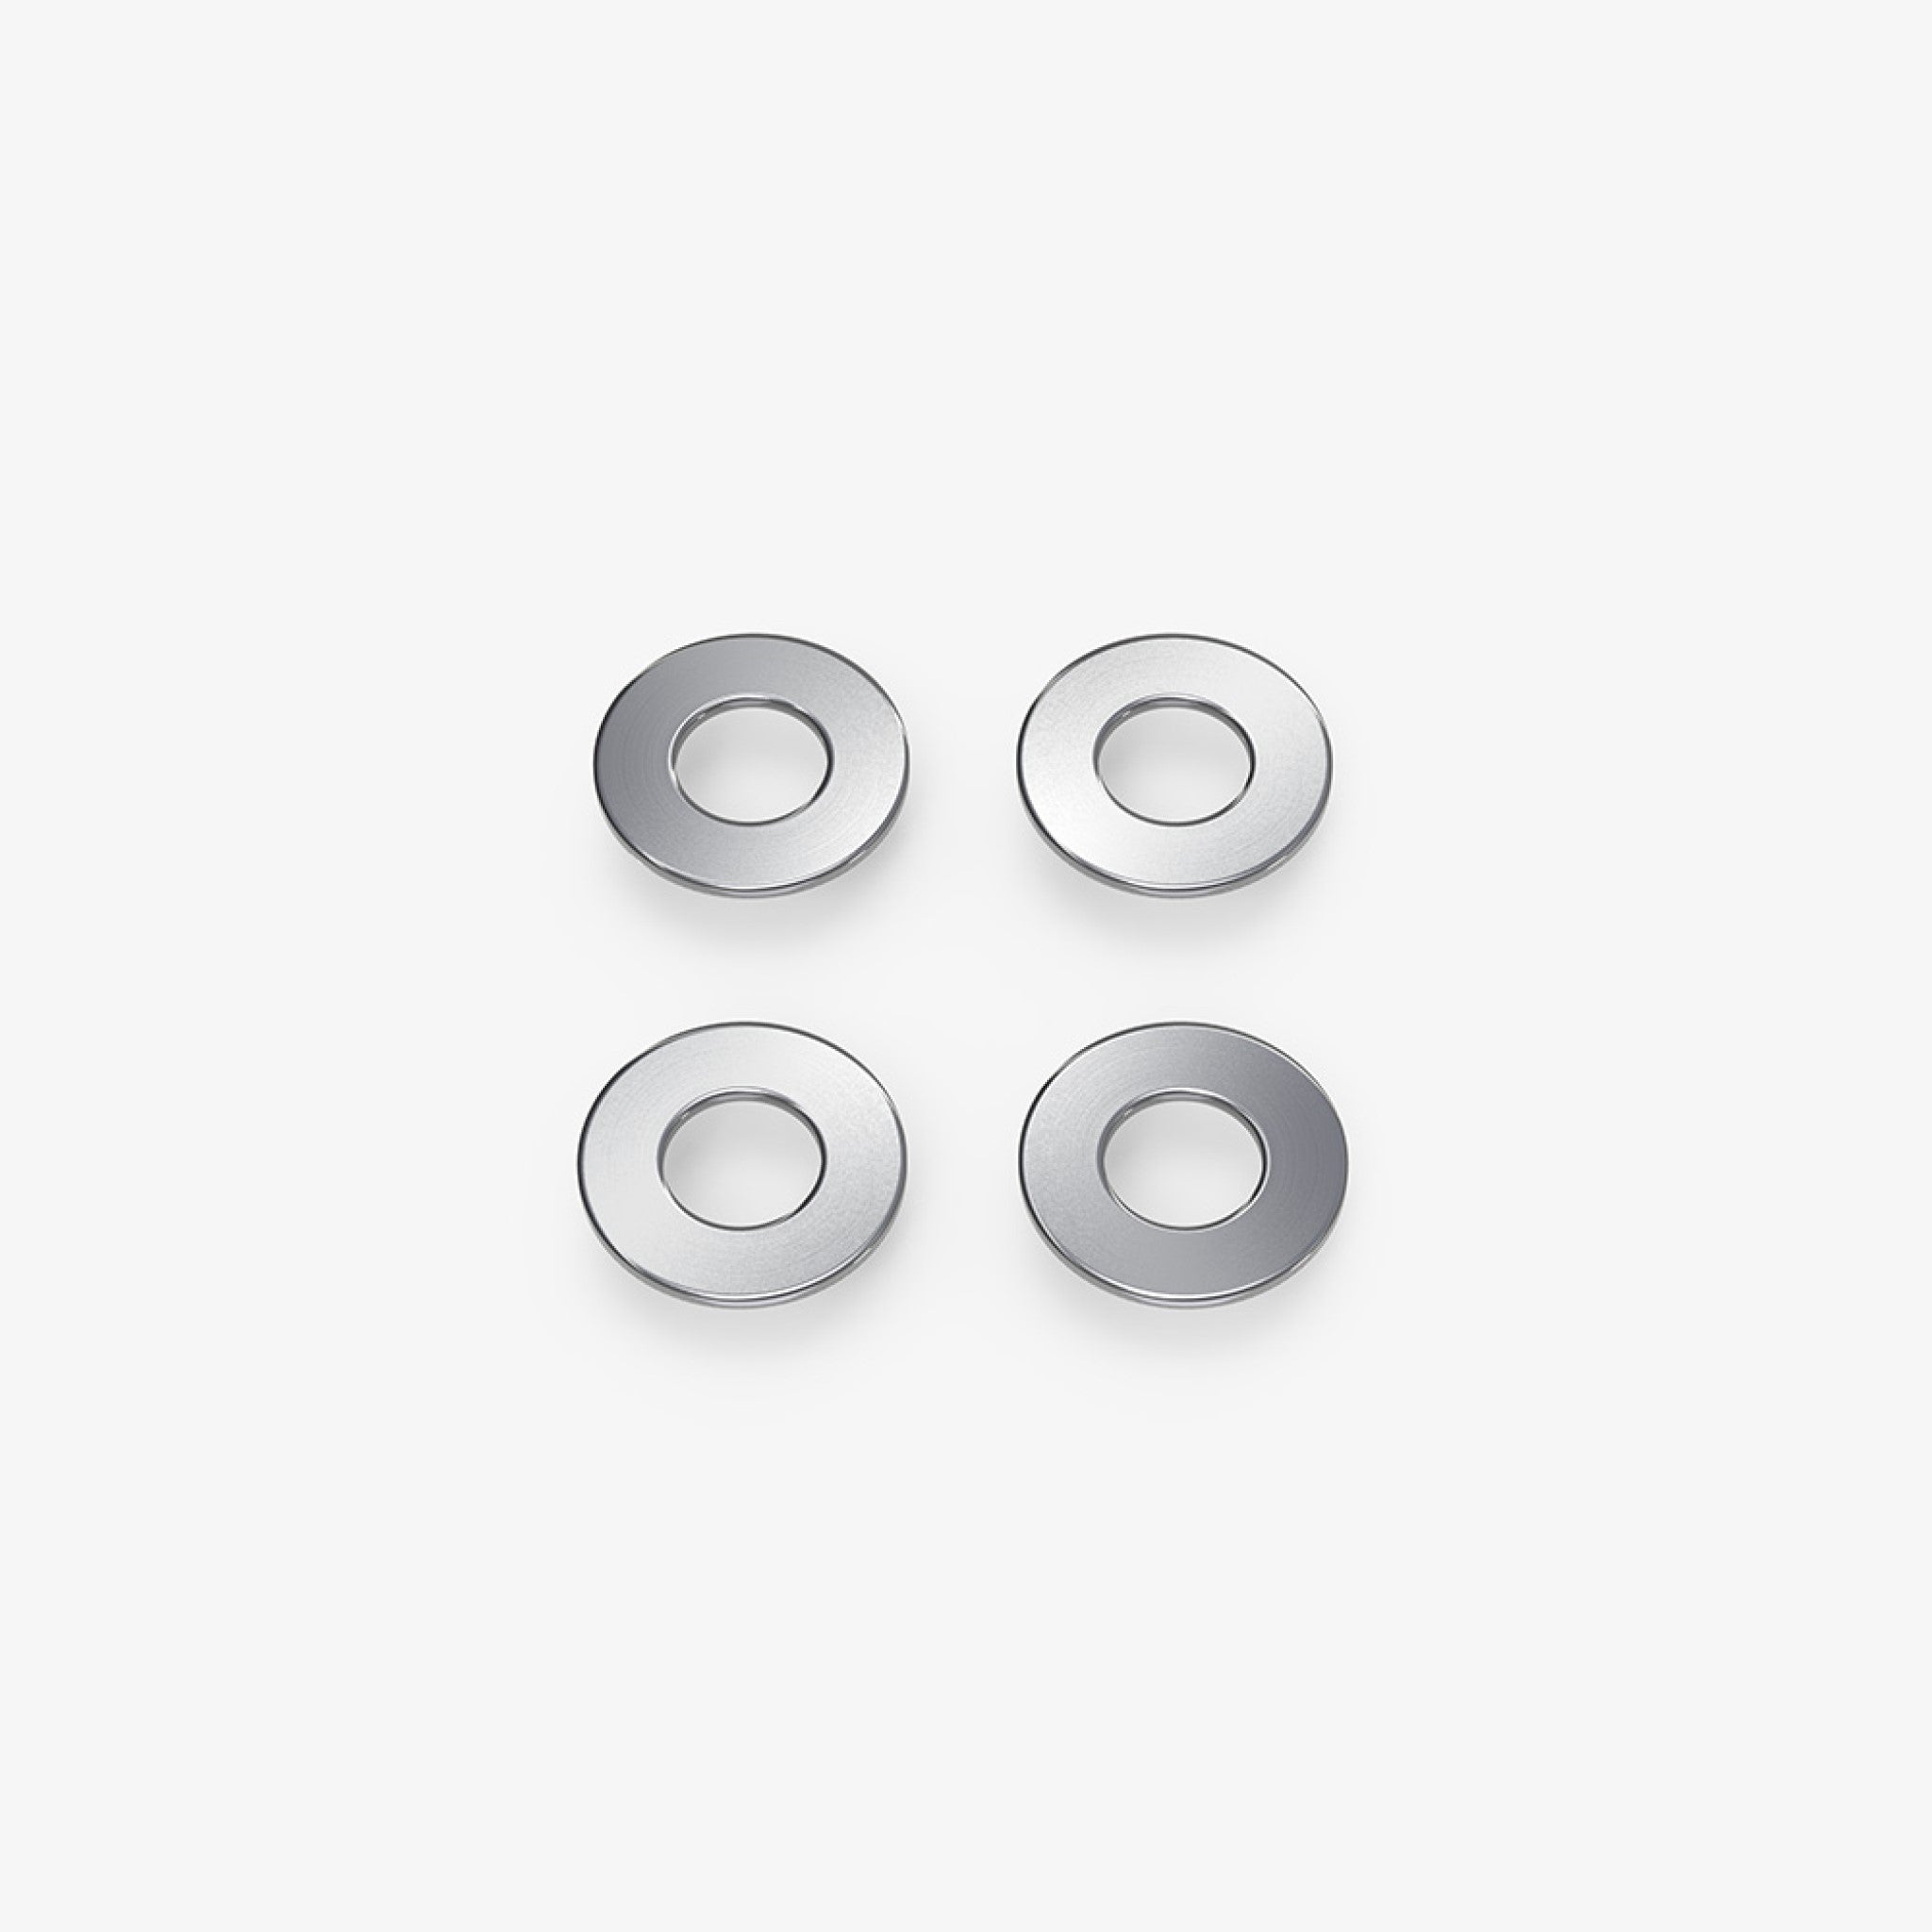 Hardened Steel Washers for Aluminum Lucha Handles and Talisong Z